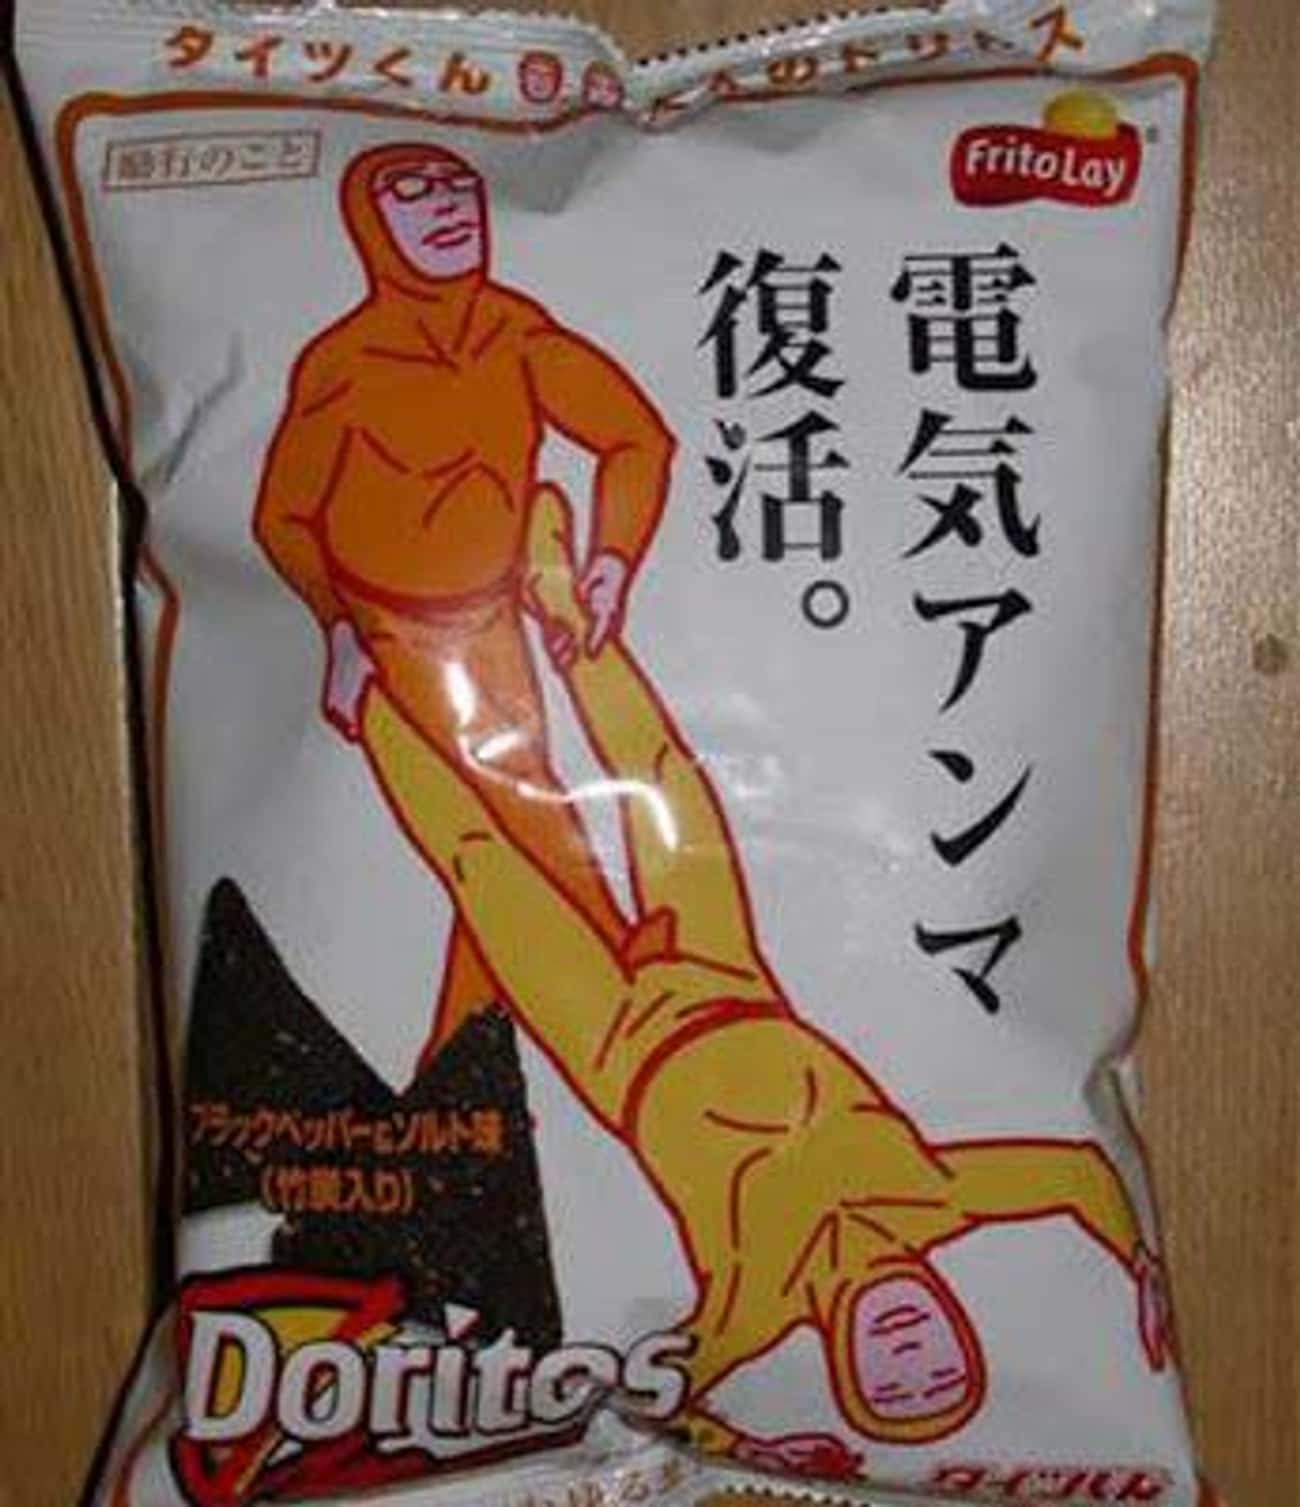 Doritos: So Good, You'll Kick Your Friend in the Nuts!